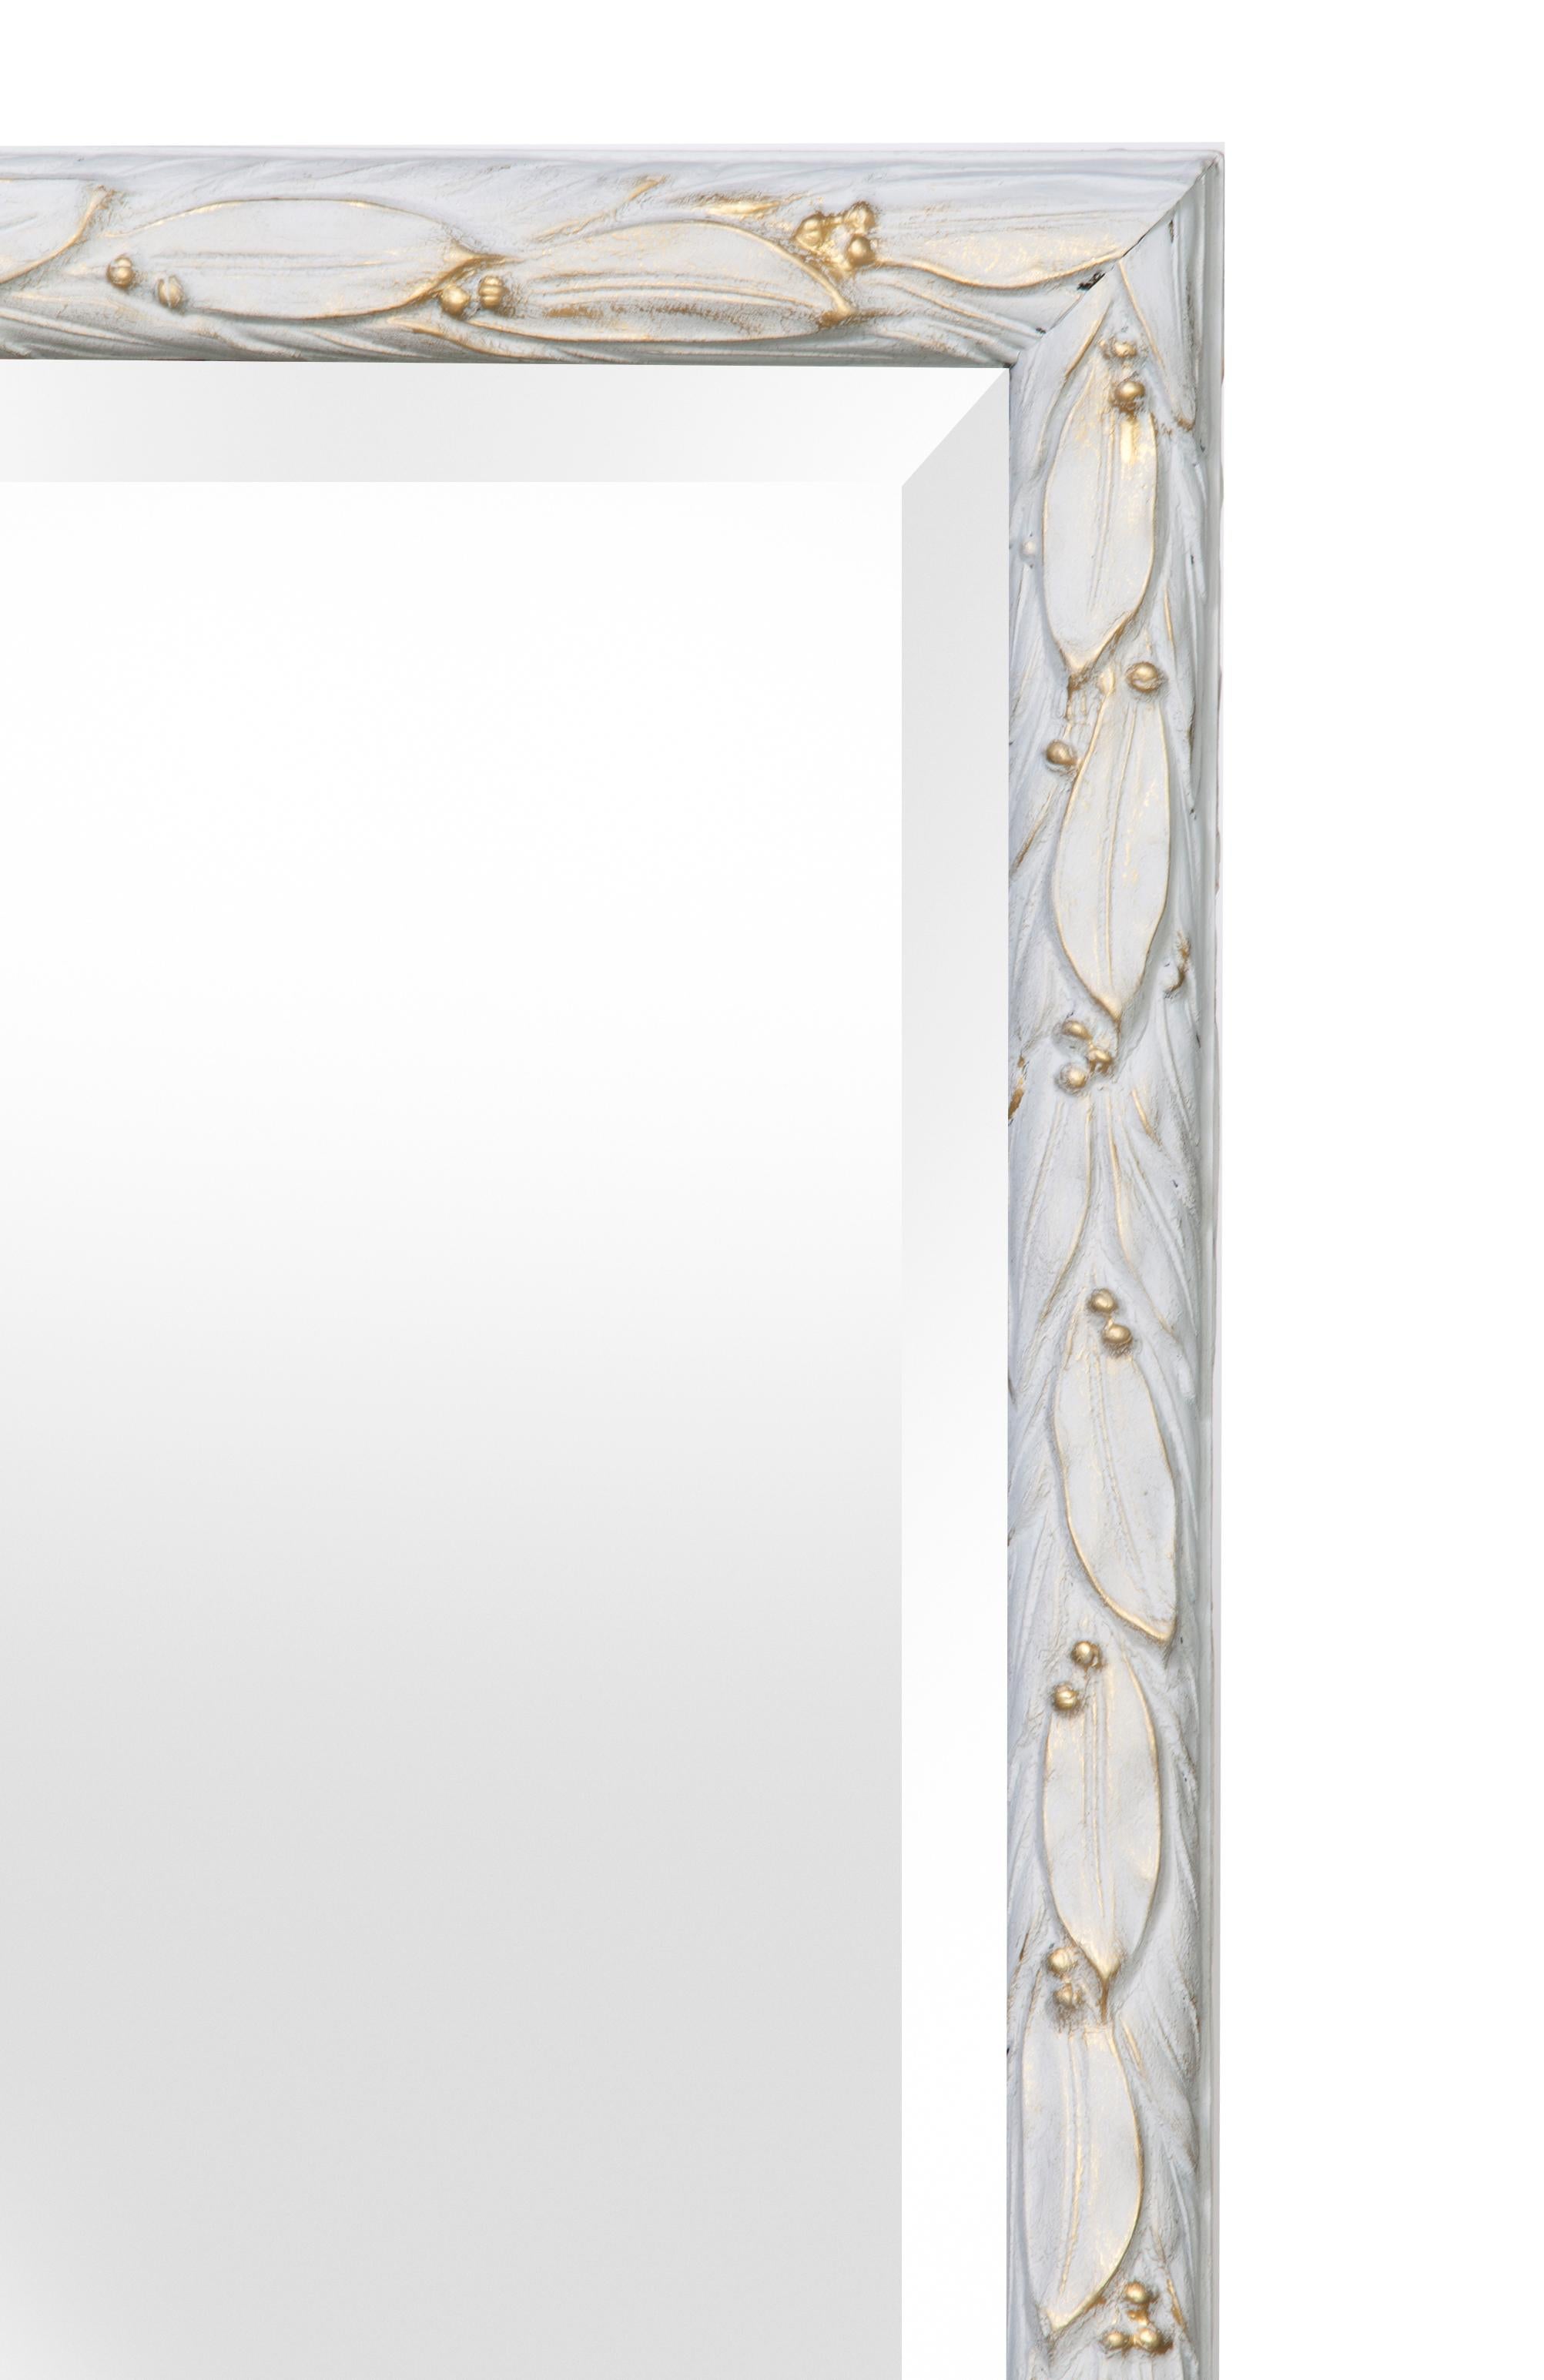 Italian hand painted mirror, incorporating both gold and clear pale gray, this mirror is simple & elegant. The gold trims the leaf edges.
Italian carved painted mirror with beautiful carved details throughout.
Wired to hang both horizontally &